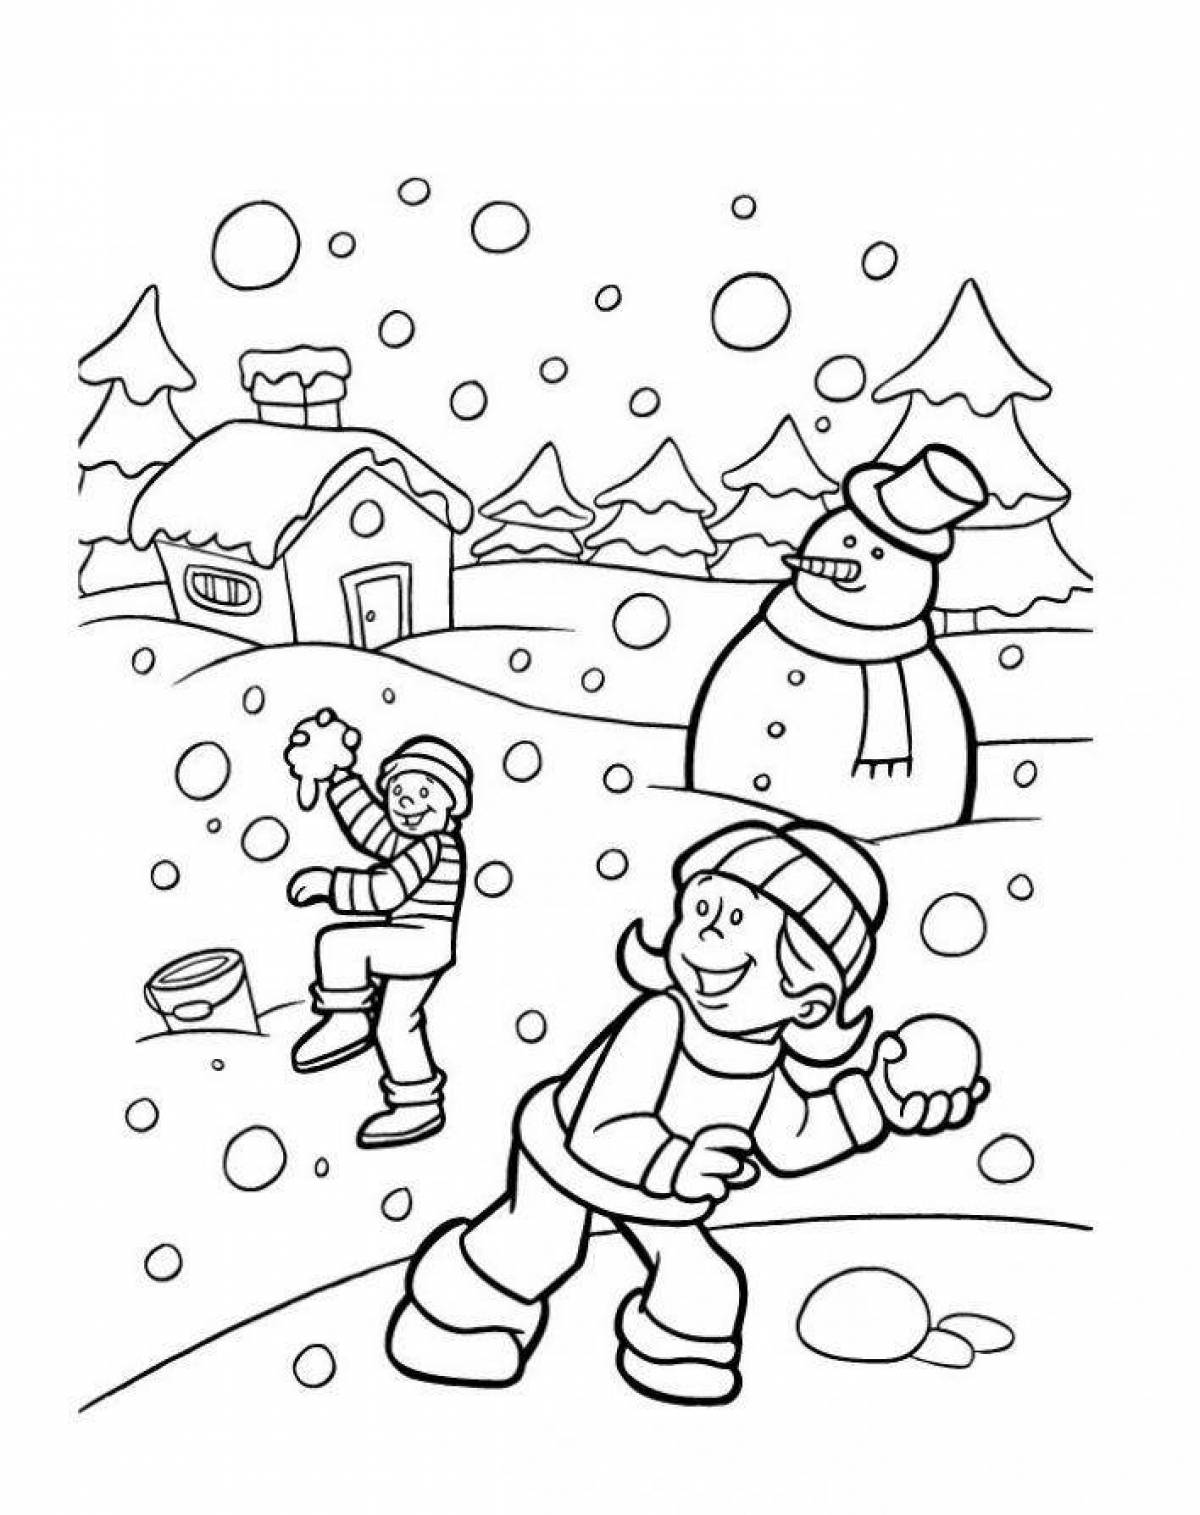 Great winter games coloring book